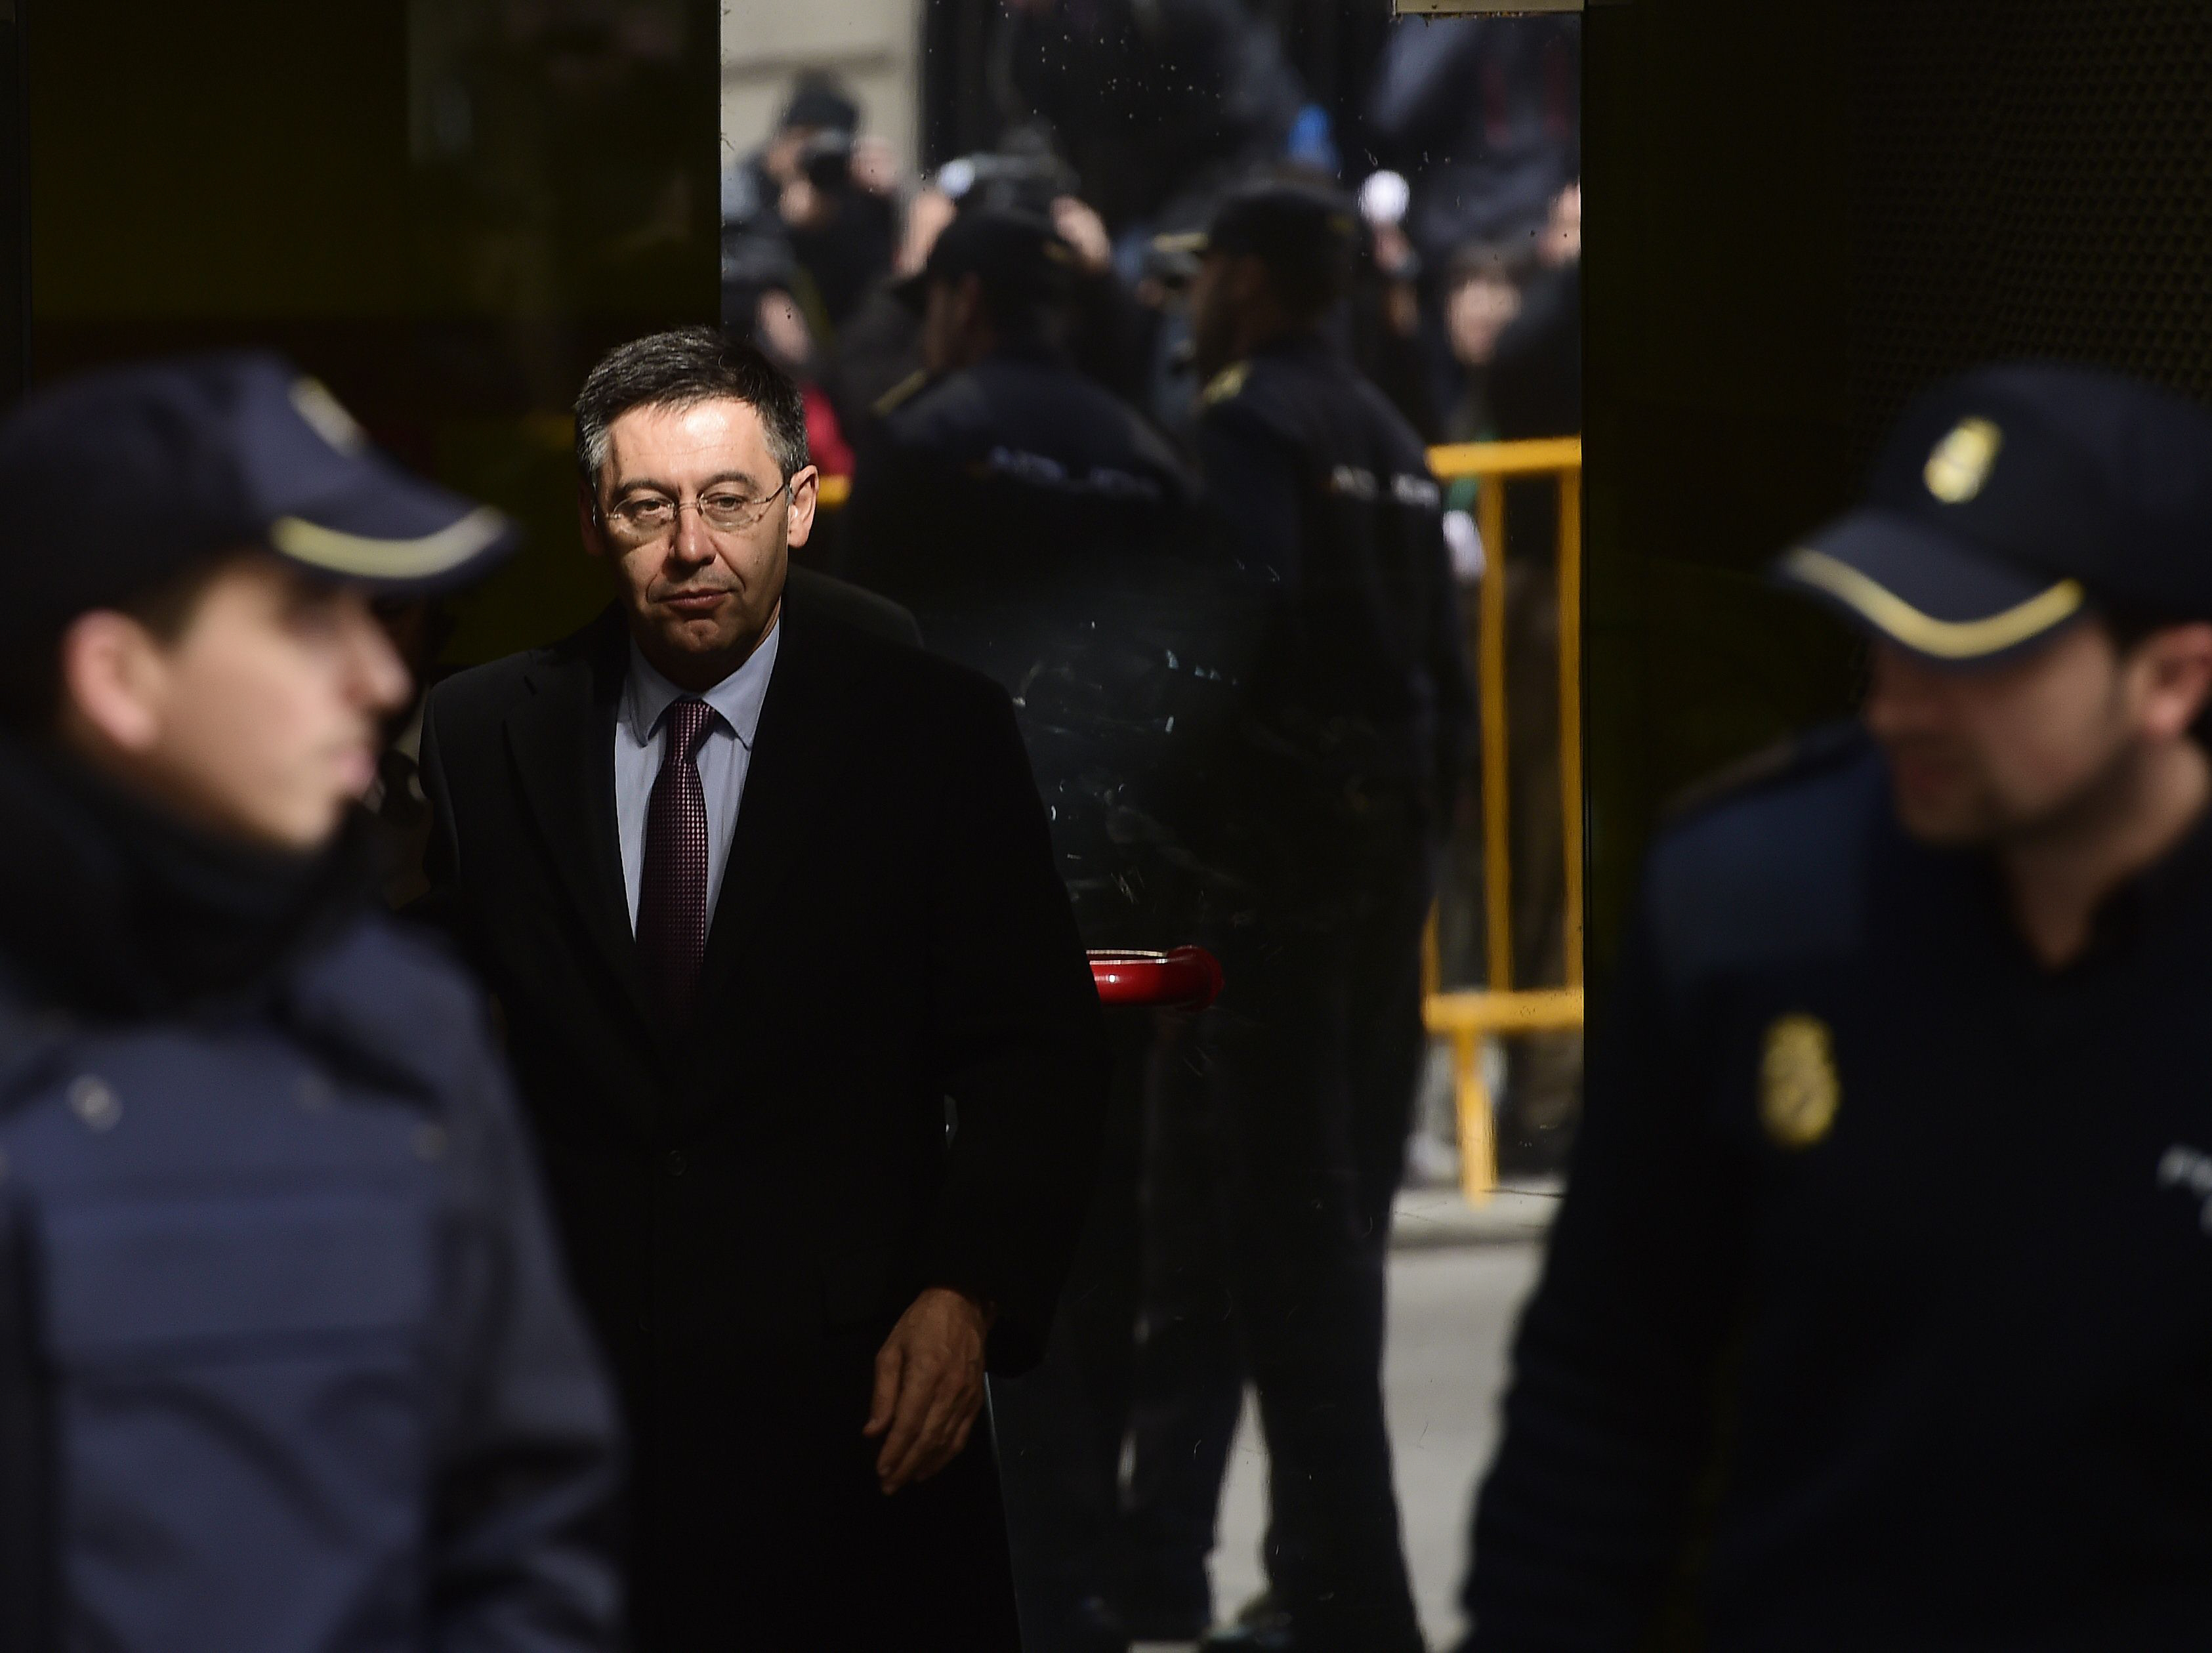 president of fc barcelona spanish football club josep maria bartomeu c leaves the national high court in madrid on february 13 2015 barcelona 039 s president bartomeu was charged with tax fraud by a spanish judge on february 3 2015 suspected of evading 2 85 million euros 3 26 million in a payment made to neymar last year photo afp